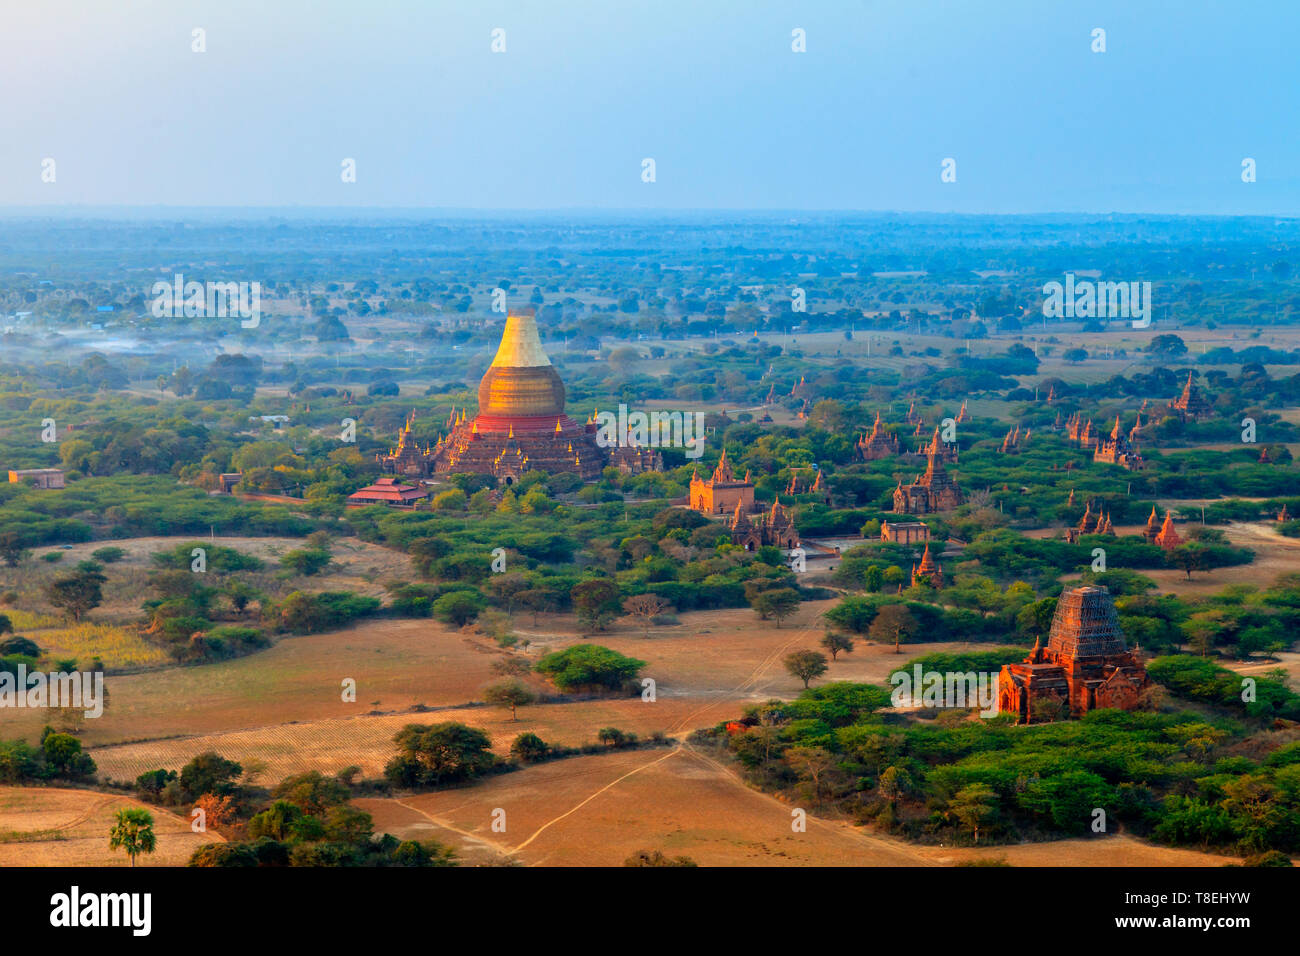 View of the Dhammayazika Pagoda from a hot air balloon flying over Bagan, Myanmar Stock Photo